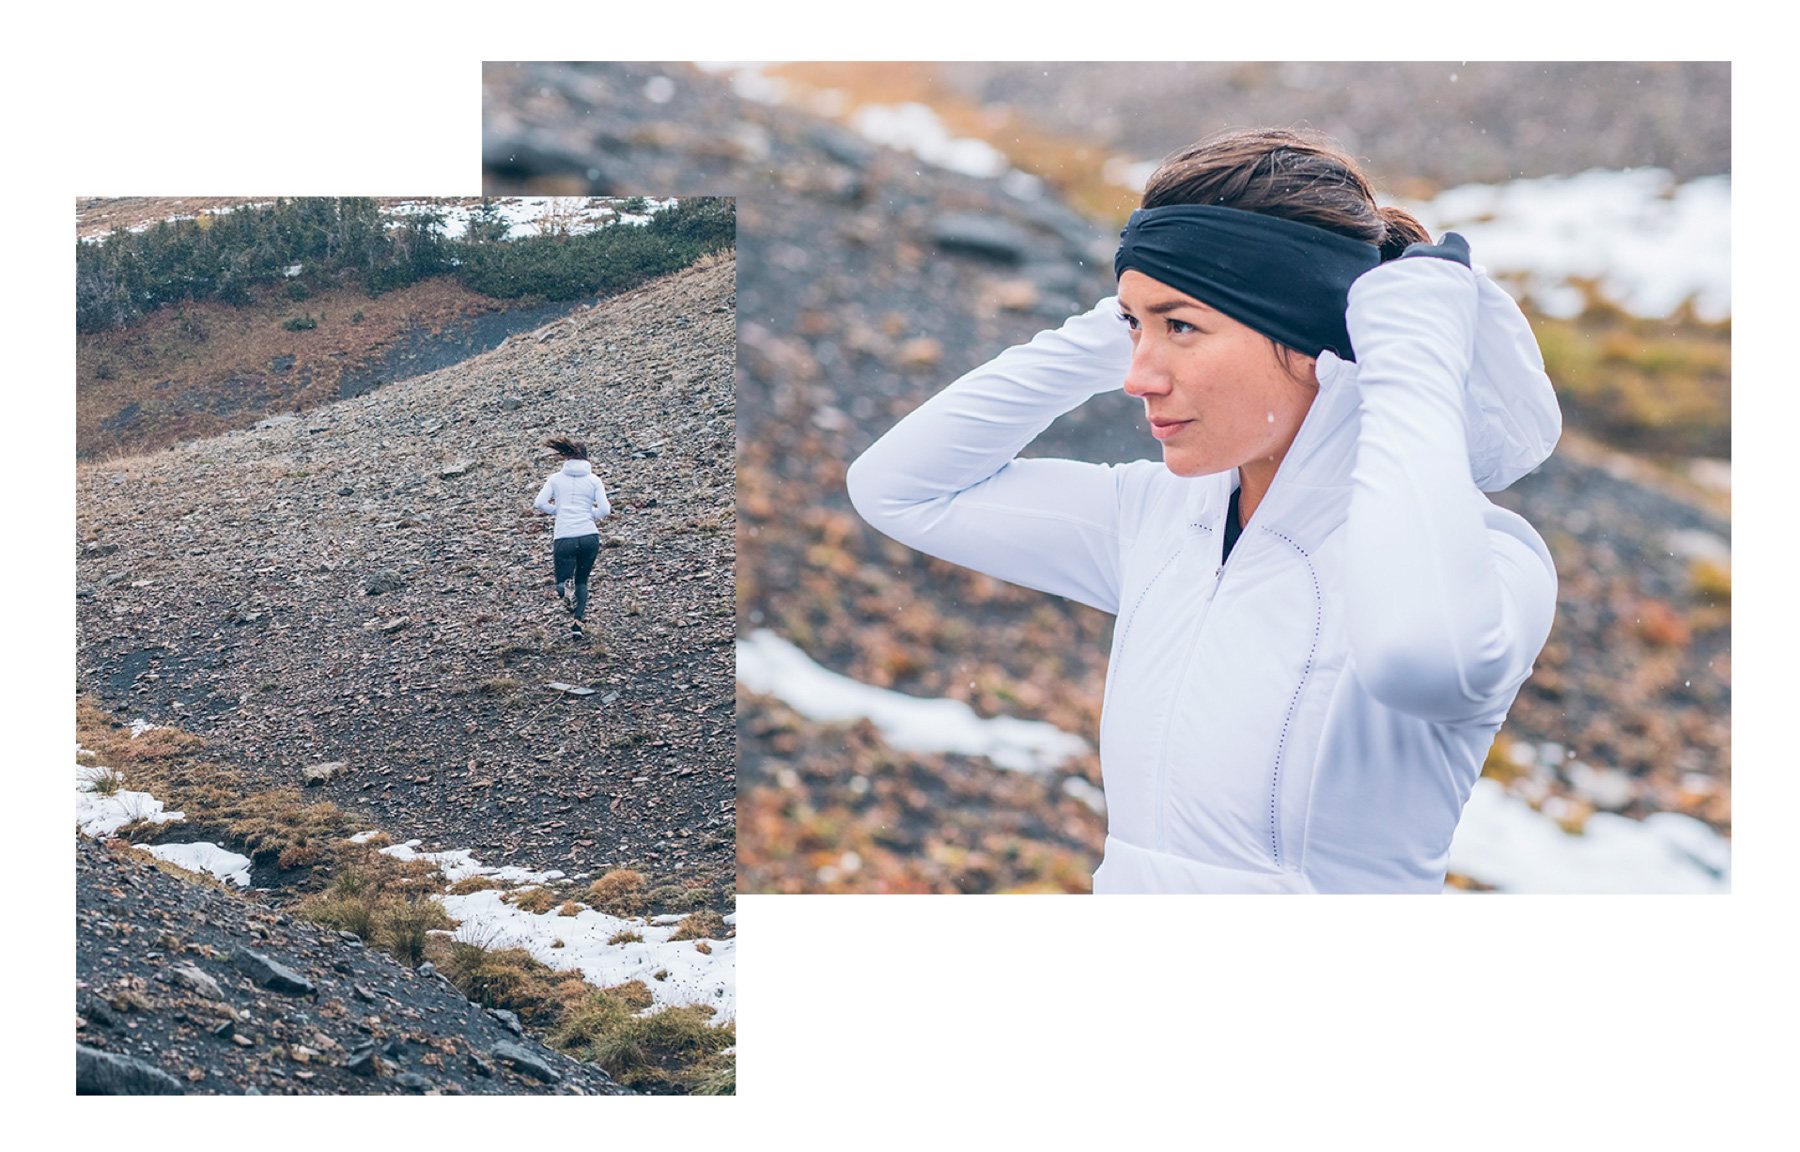 lululemon_running_campaign_photography_cold_mountains_image_29-2.jpg